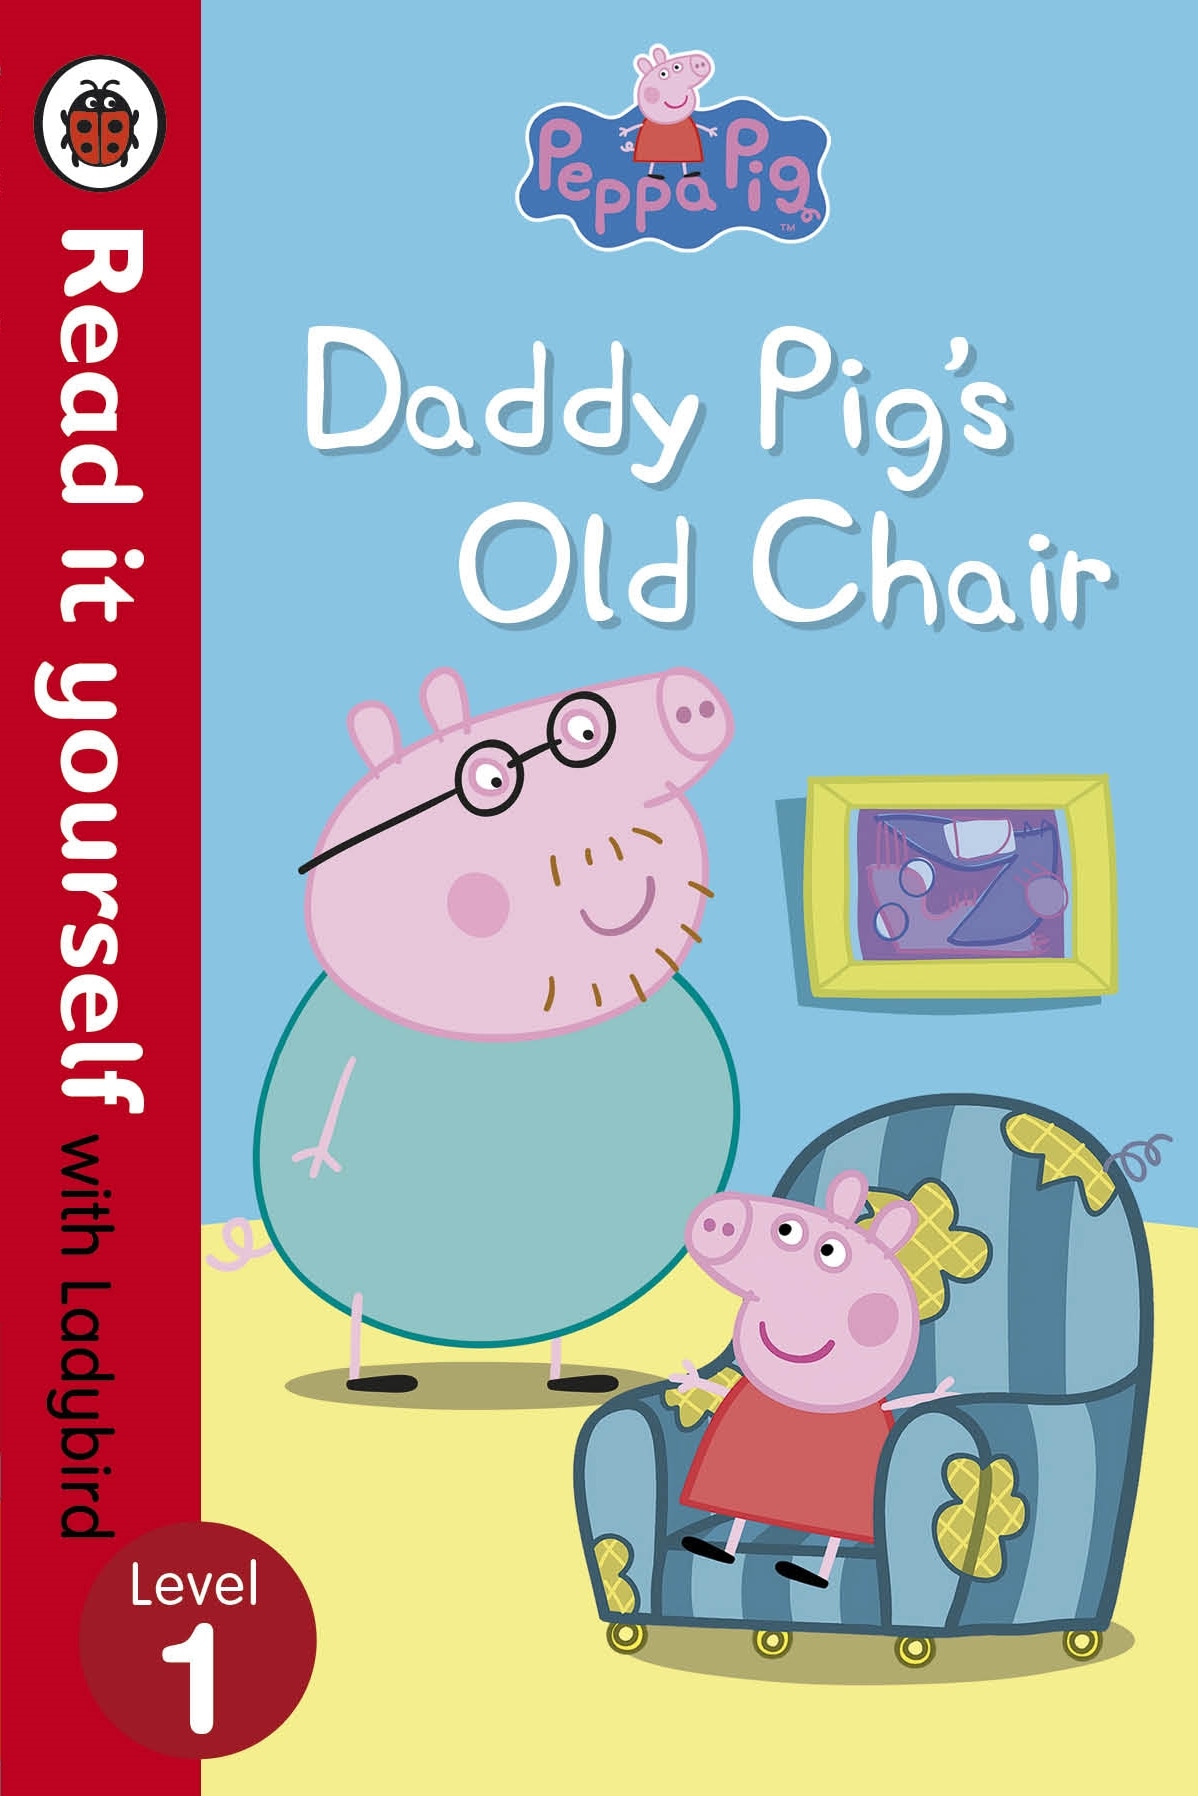 Book “Peppa Pig: Daddy Pig's Old Chair - Read it yourself with Ladybird” by Ladybird, Peppa Pig — July 3, 2014